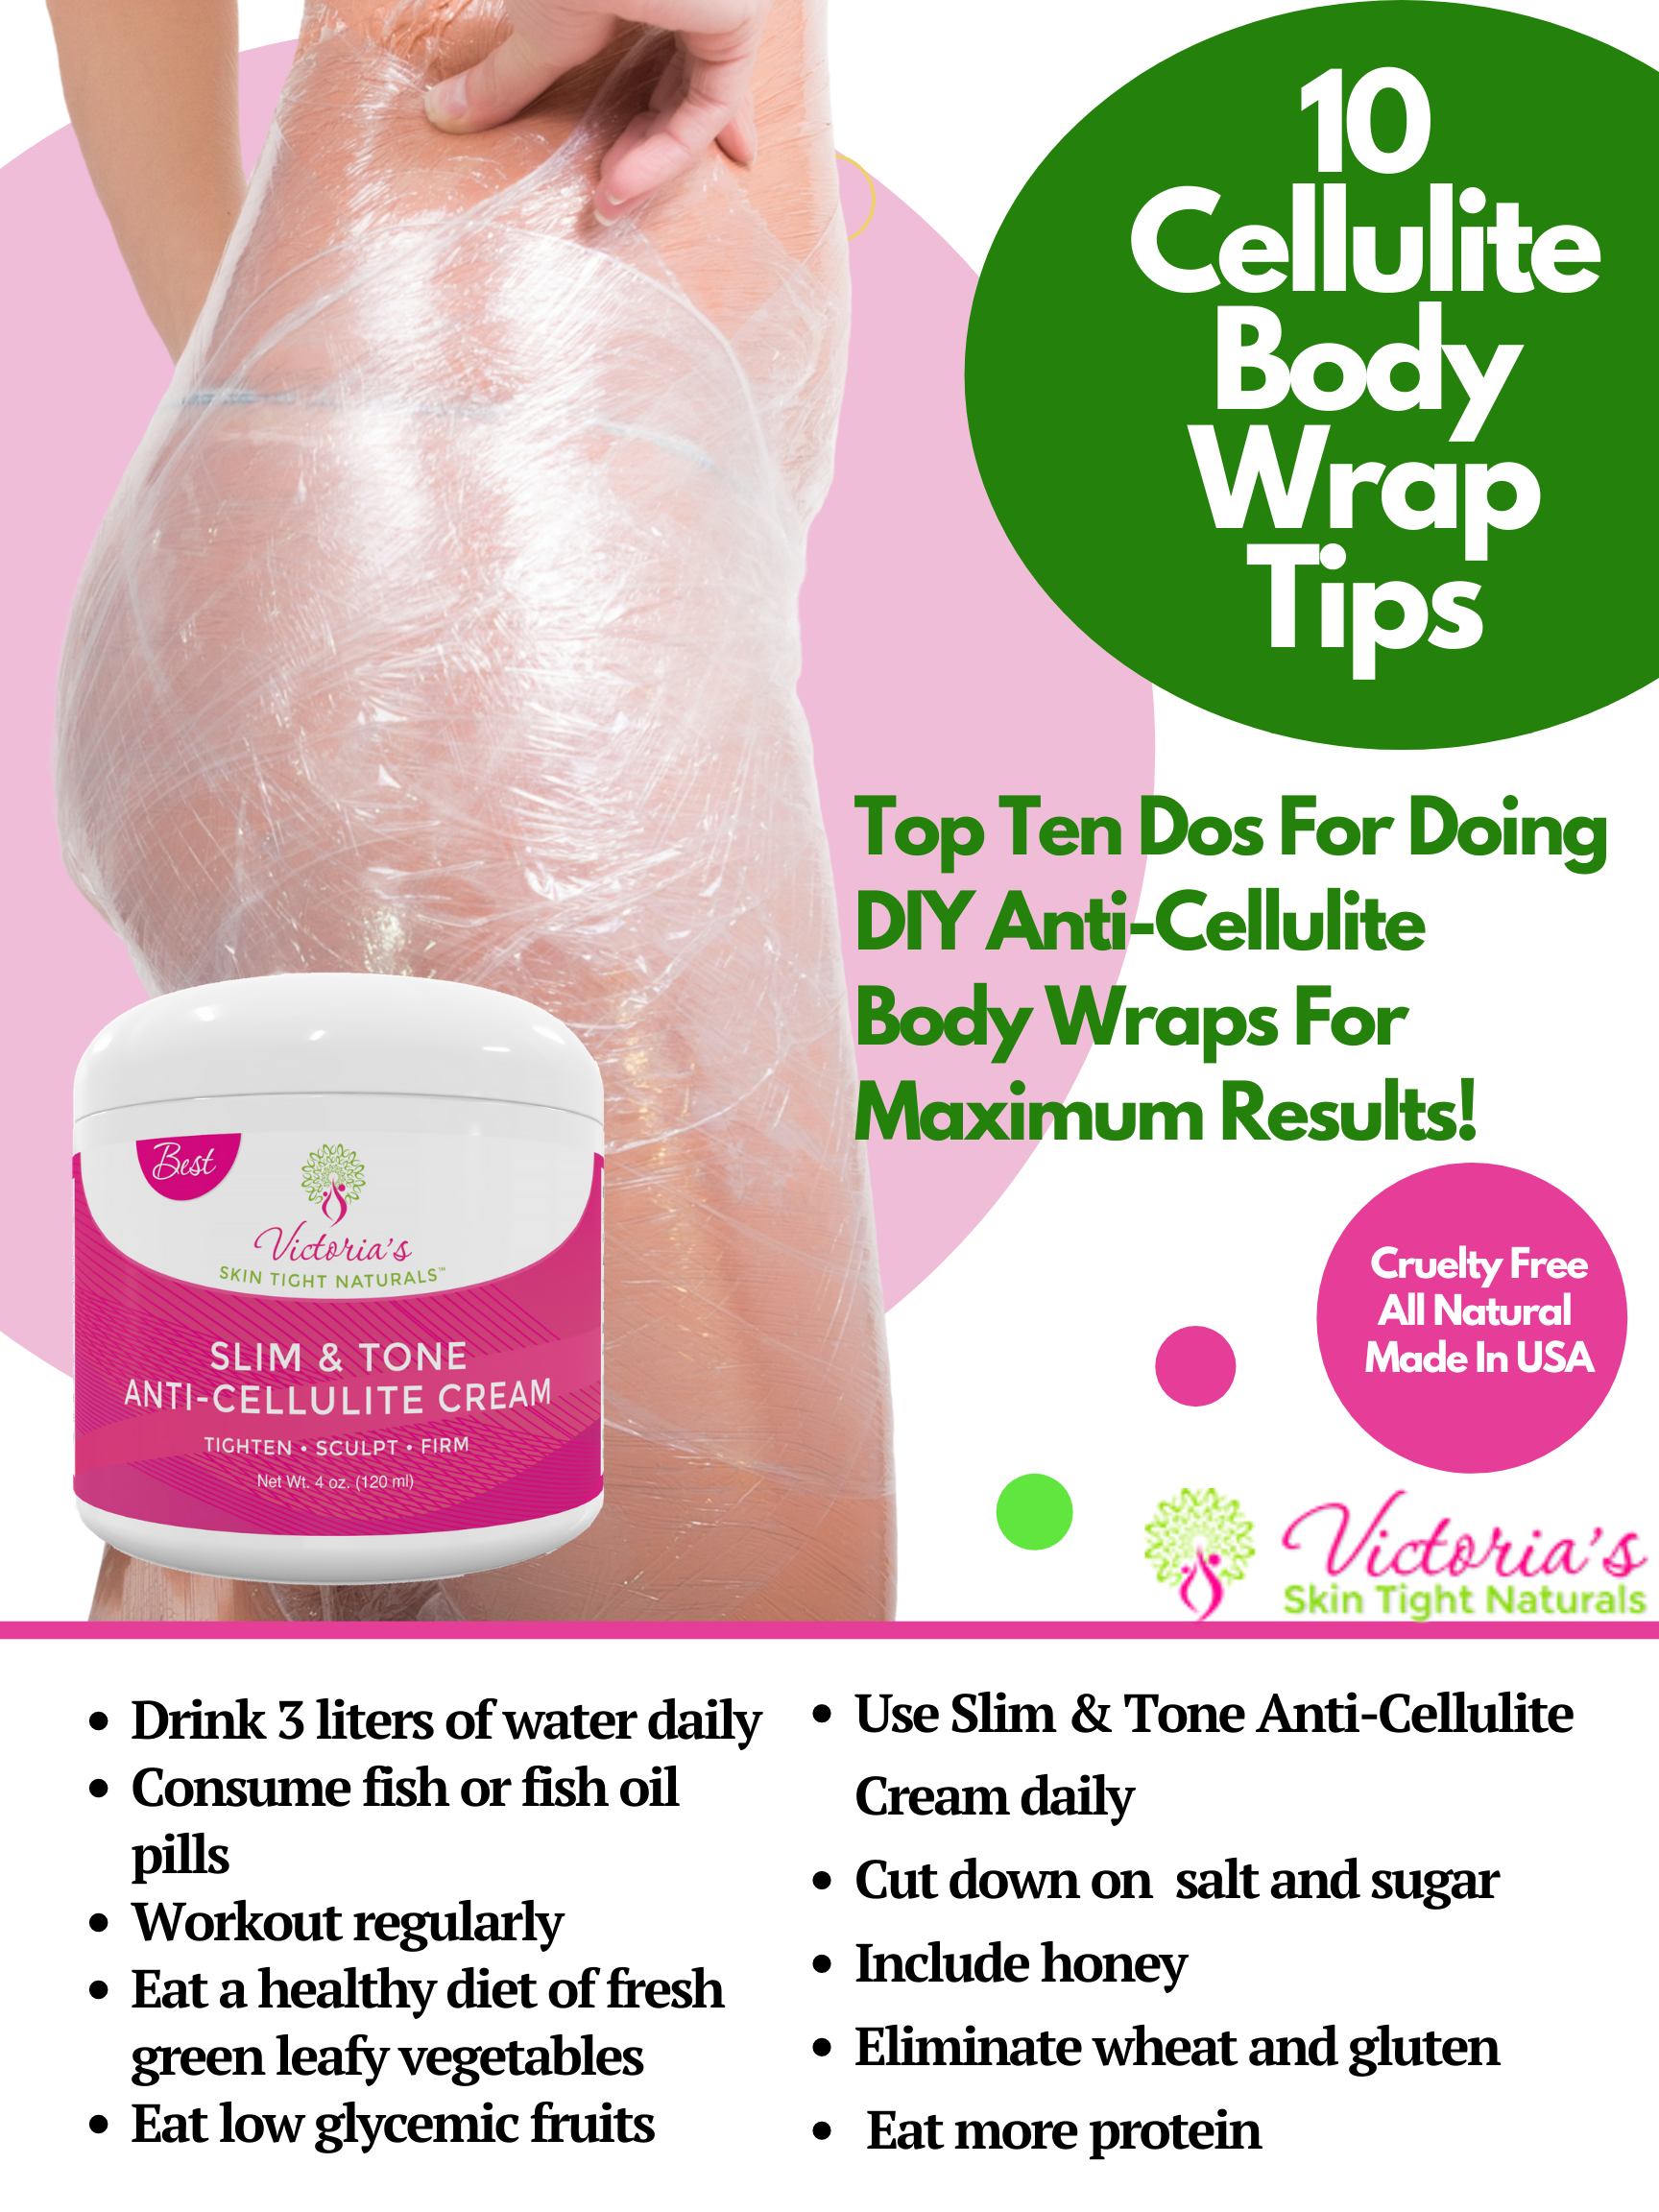 10 Do’s And Don’ts for DIY Anti-Cellulite Body Wraps